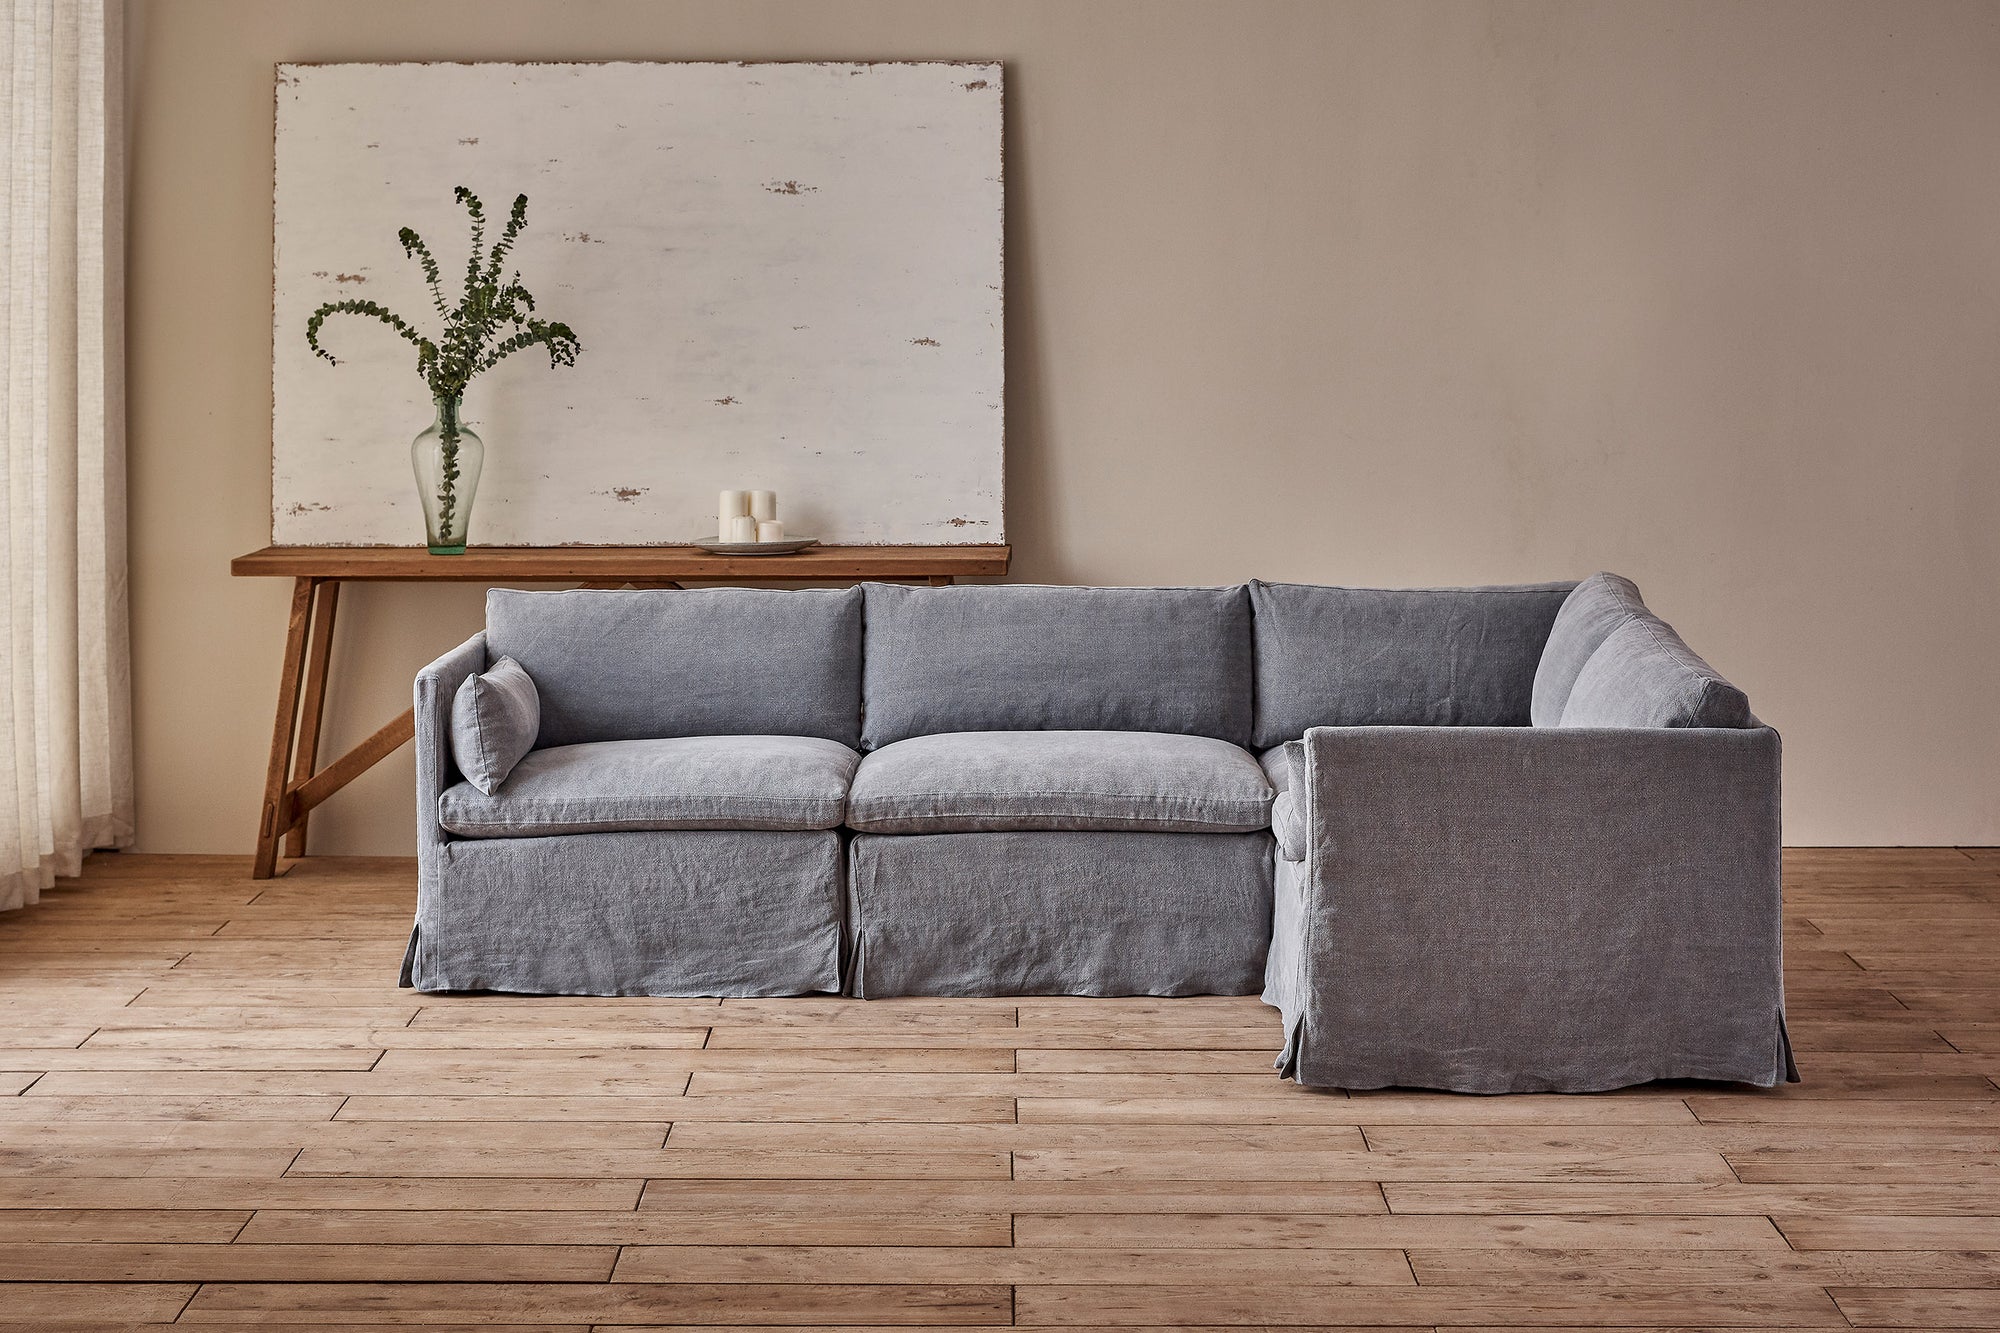 Gabriel L-Shape Sectional Sofa in Ink Cap, a medium cool grey Light Weight Linen, placed in a sunlit room with a console table